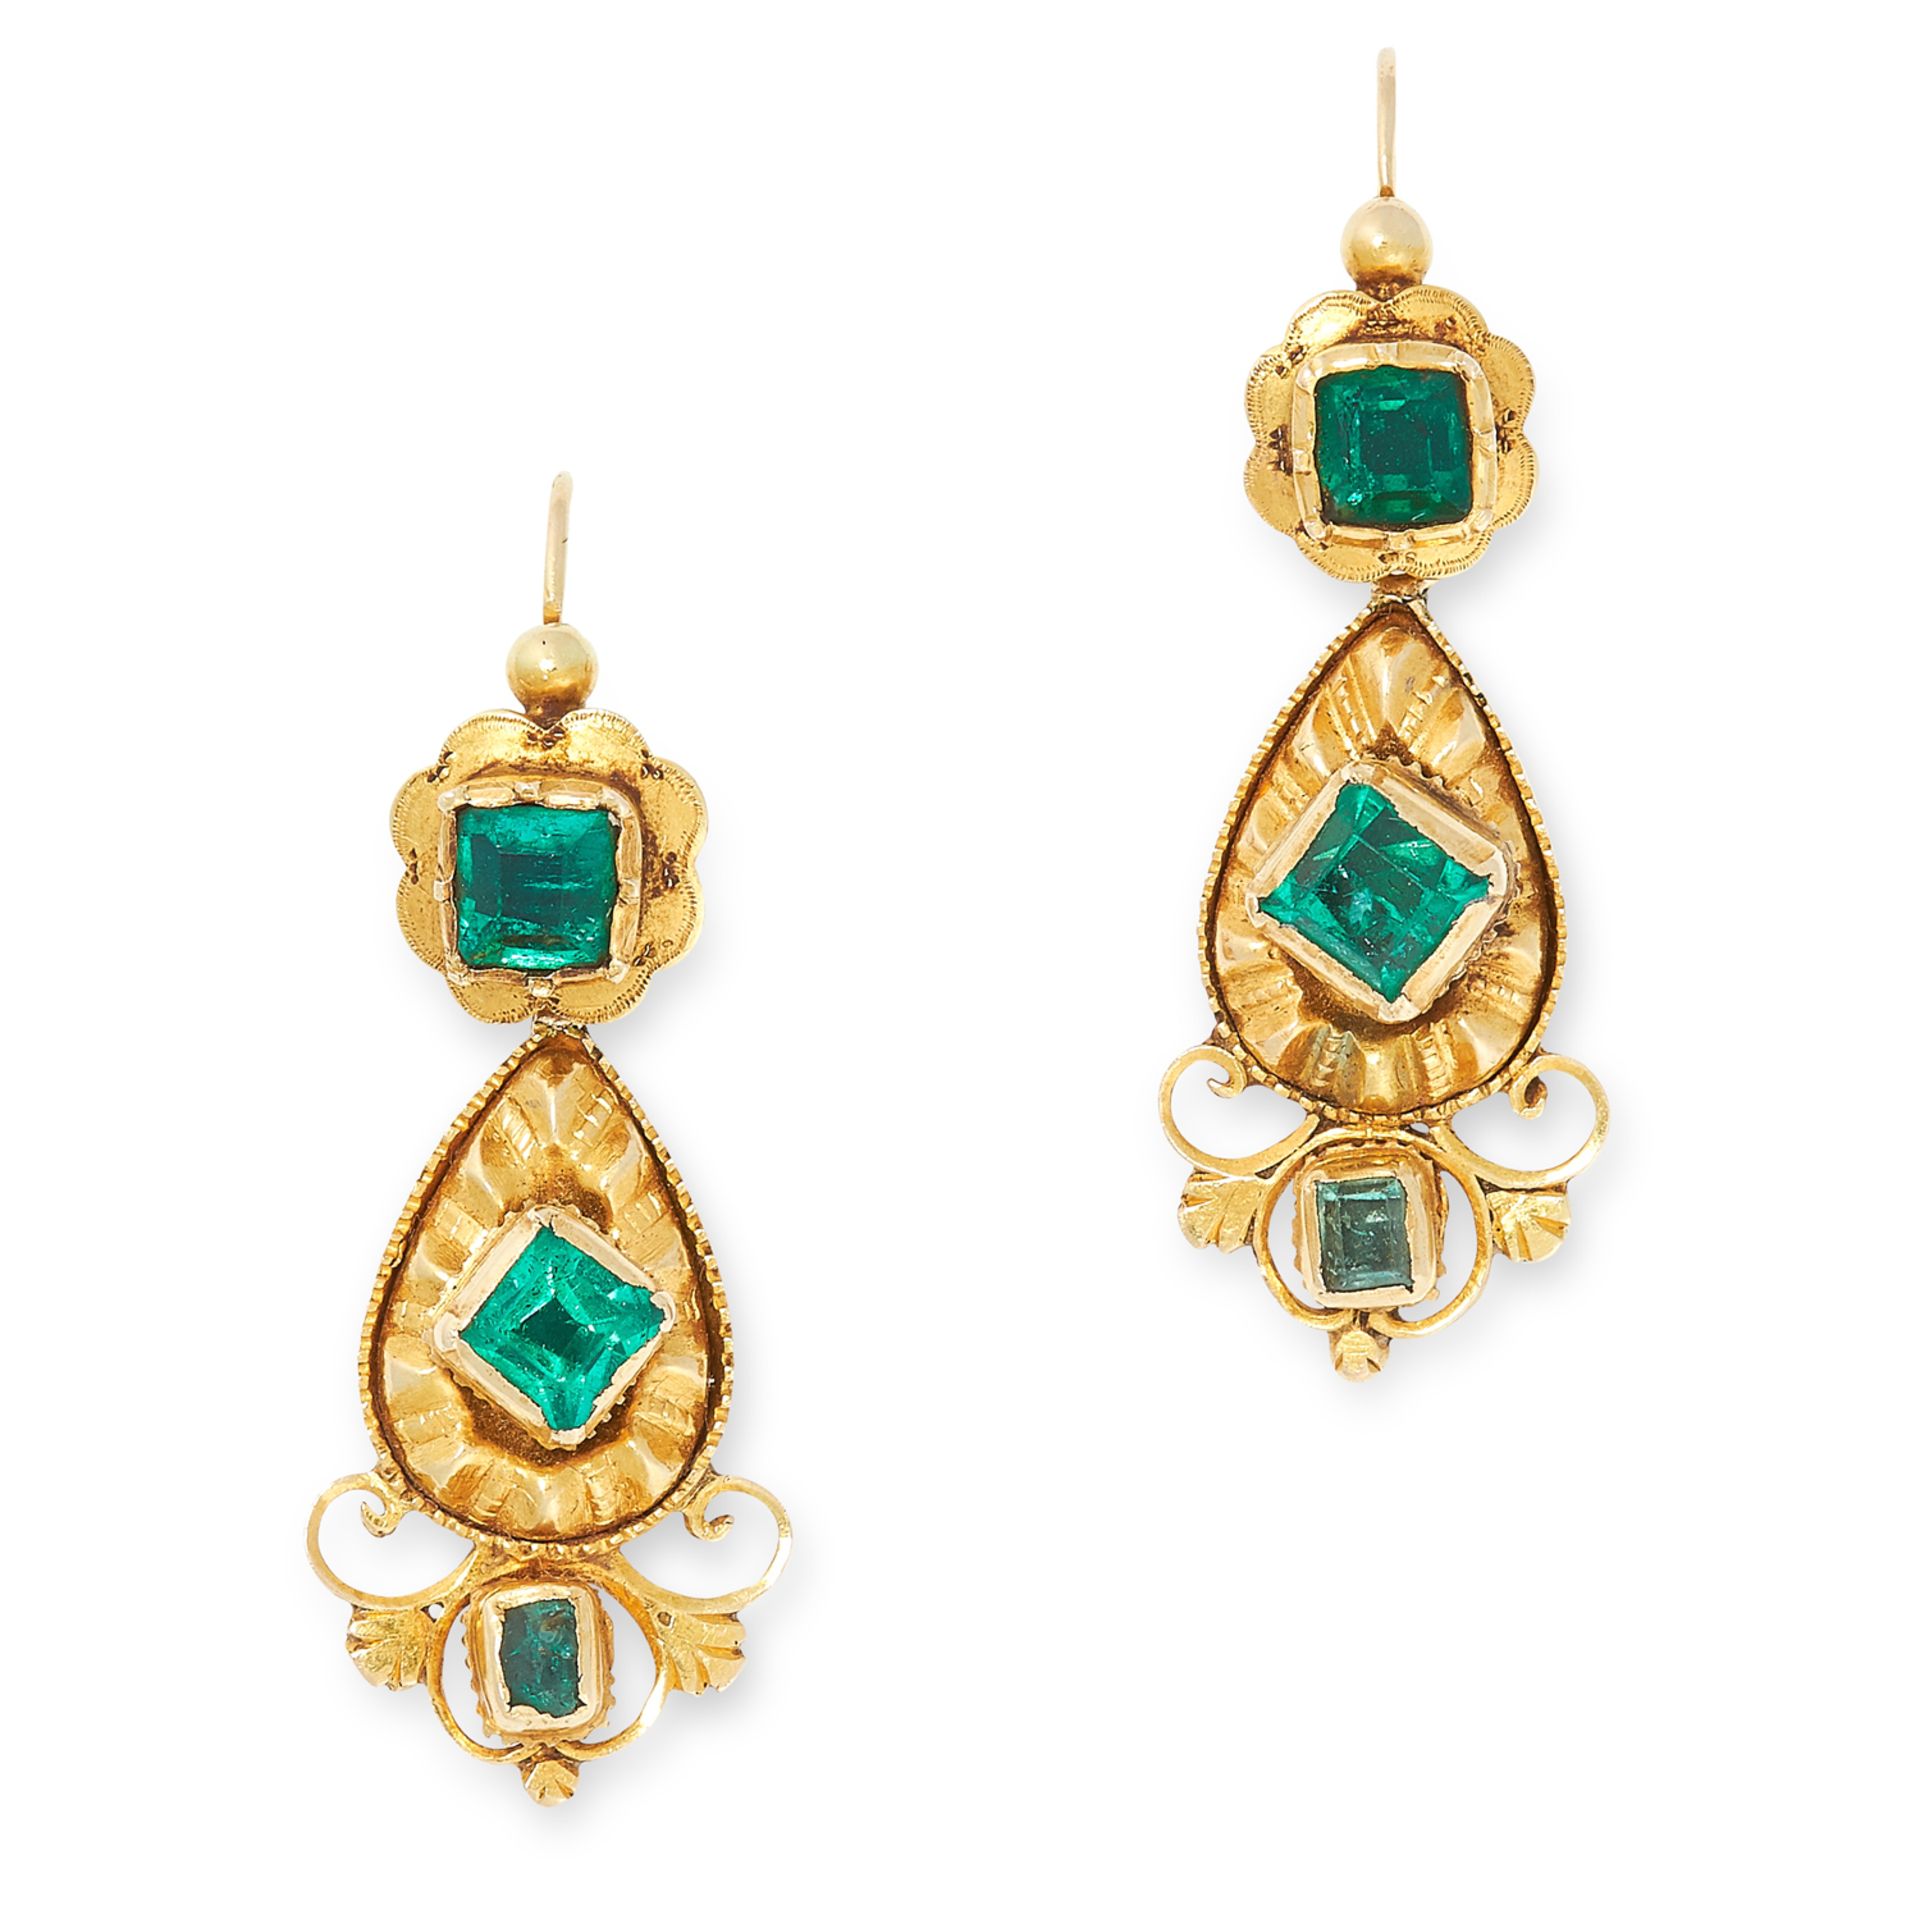 A PAIR OF ANTIQUE EMERALD EARRINGS, SPANISH CIRCA 1800 in high carat yellow gold, the articulated